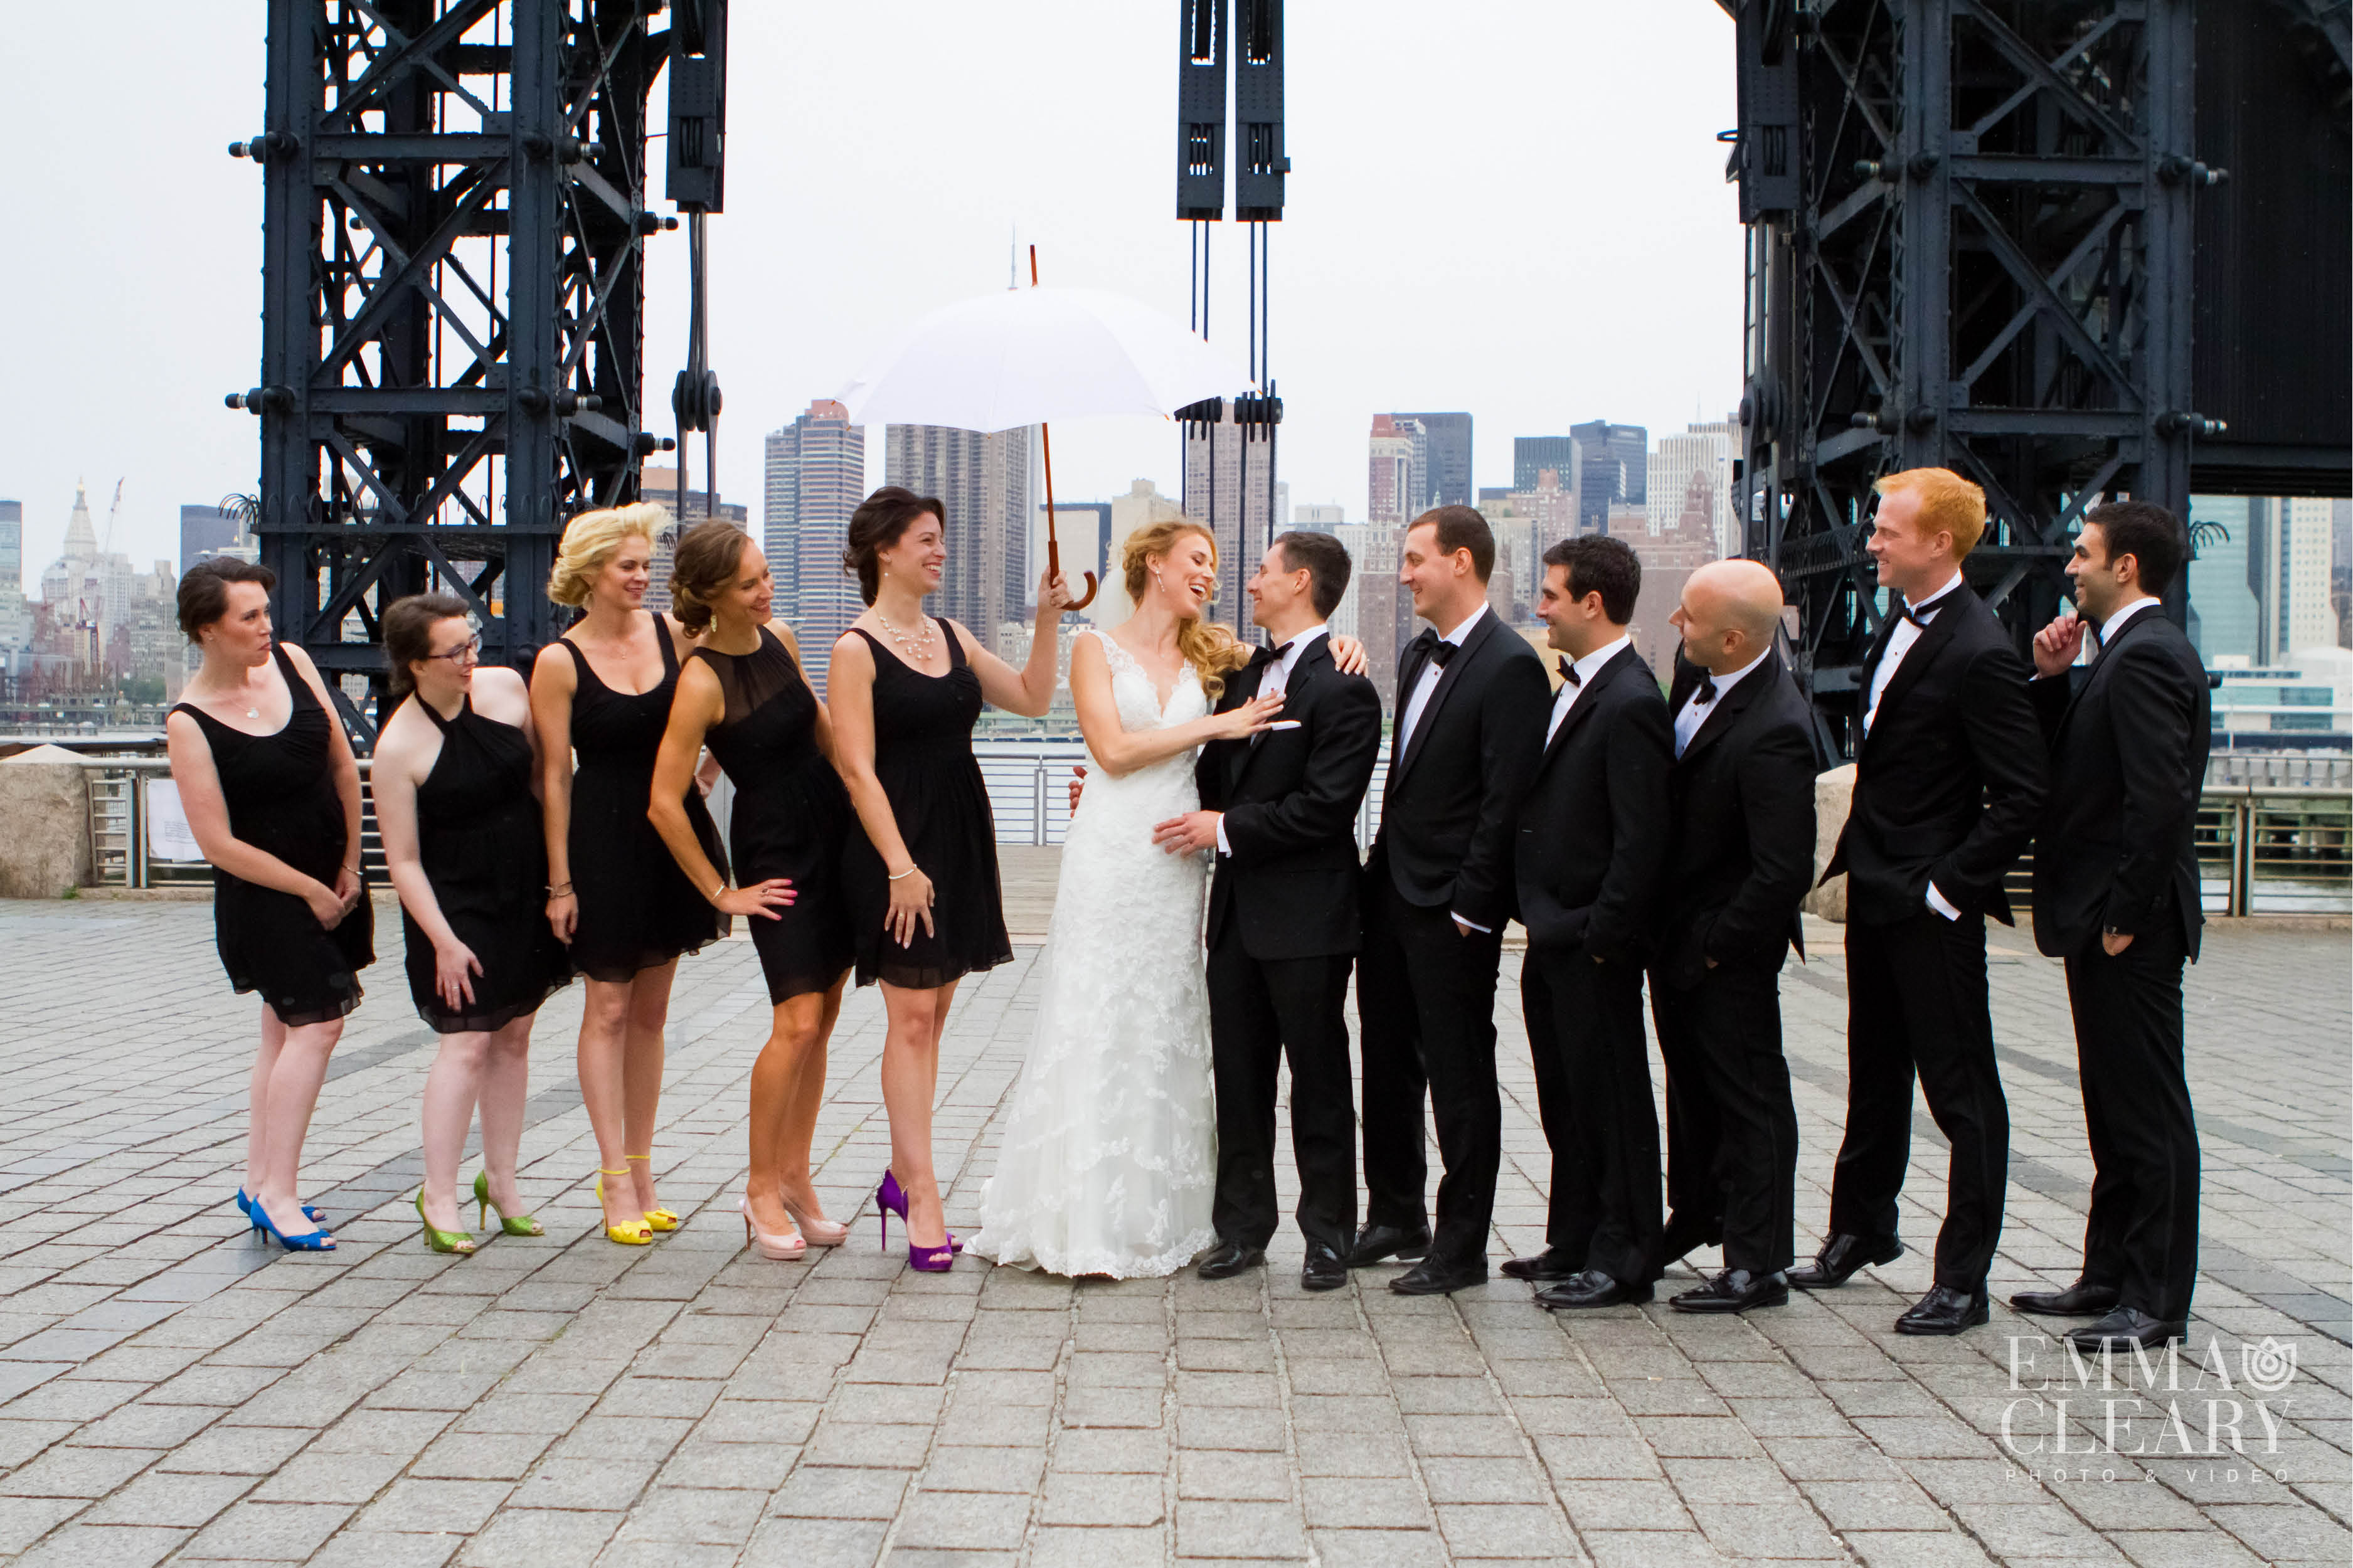 Emma_cleary_photography the Metropolitan Building wedding12